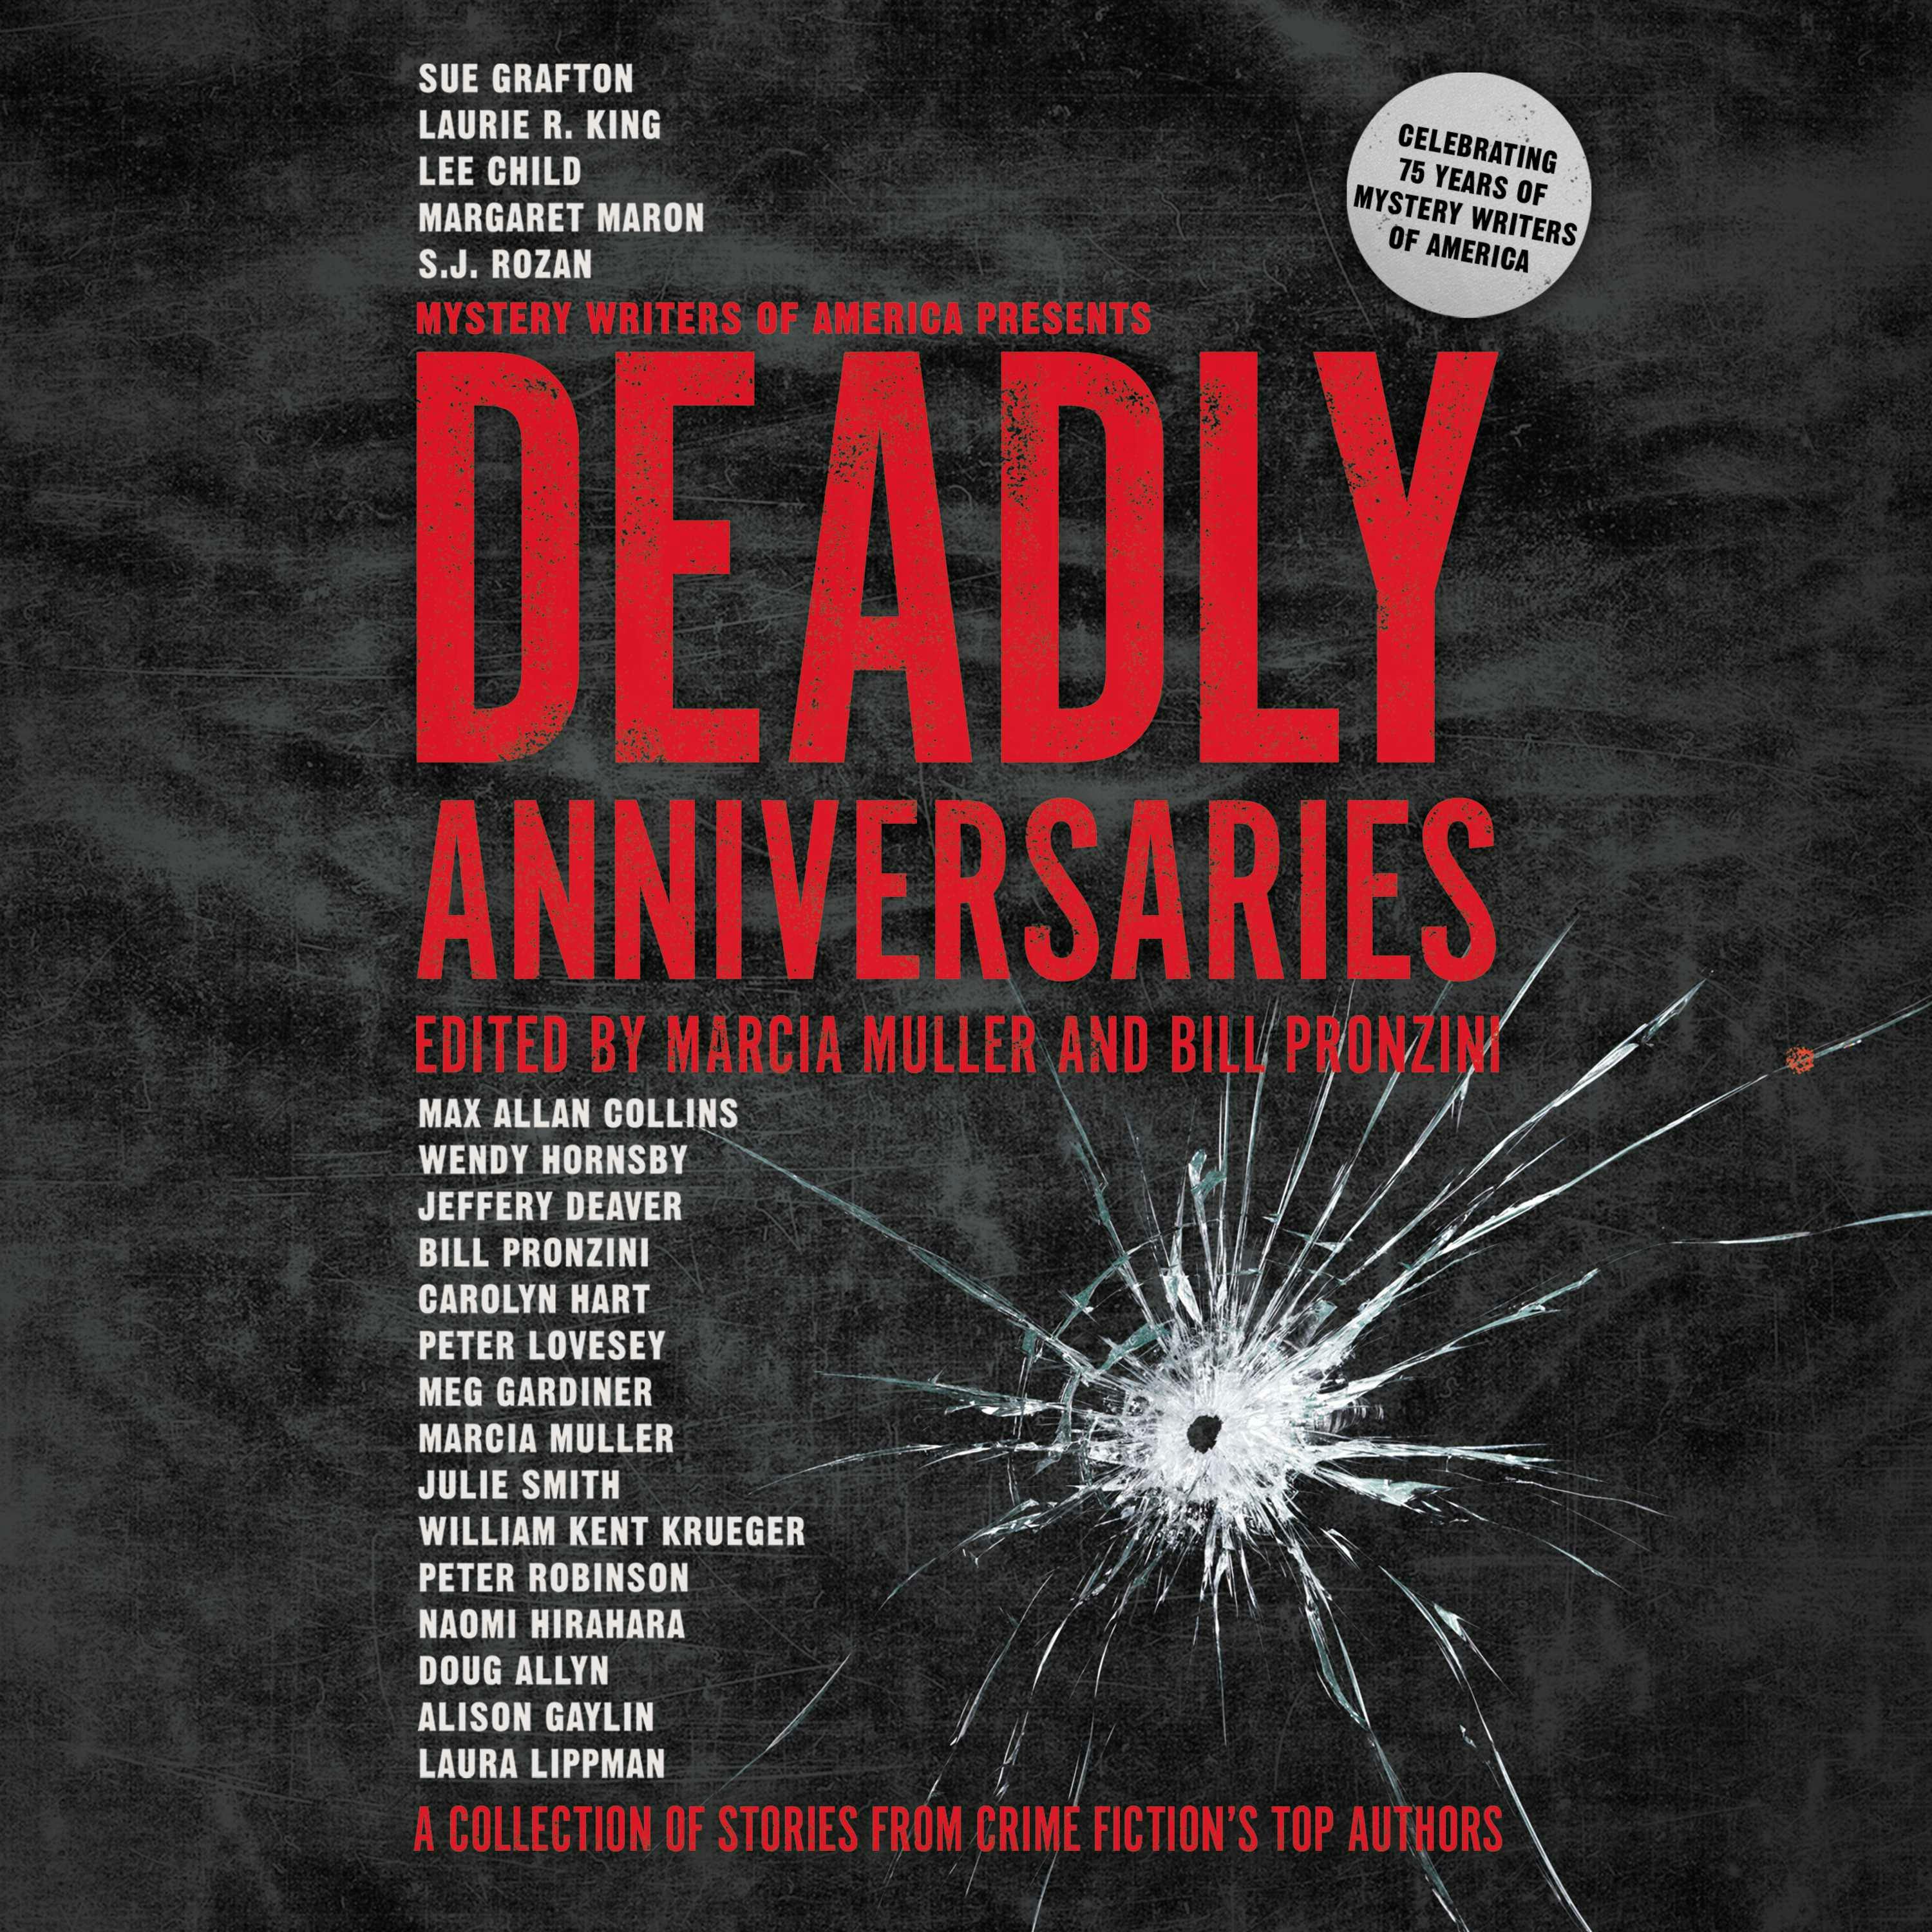 Deadly Anniversaries: A Collection of Stories from Crime Fiction's Top Authors - Marcia Muller, Bill Pronzini